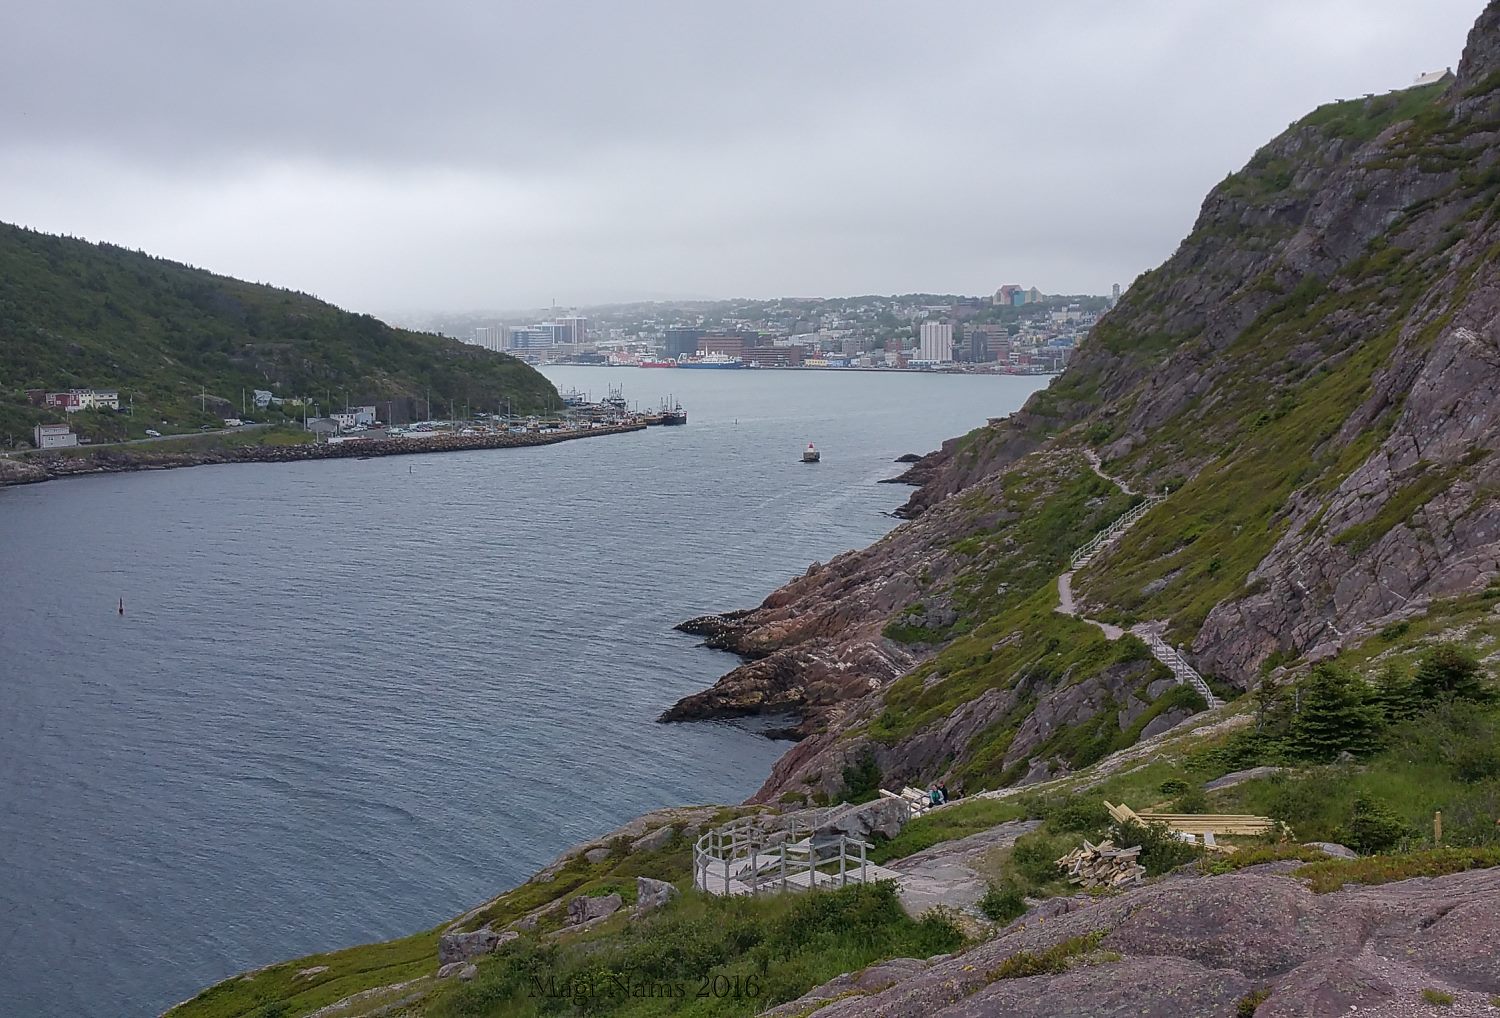 St. John's, Newfoundland and Labrador, North America's Most Eastern City